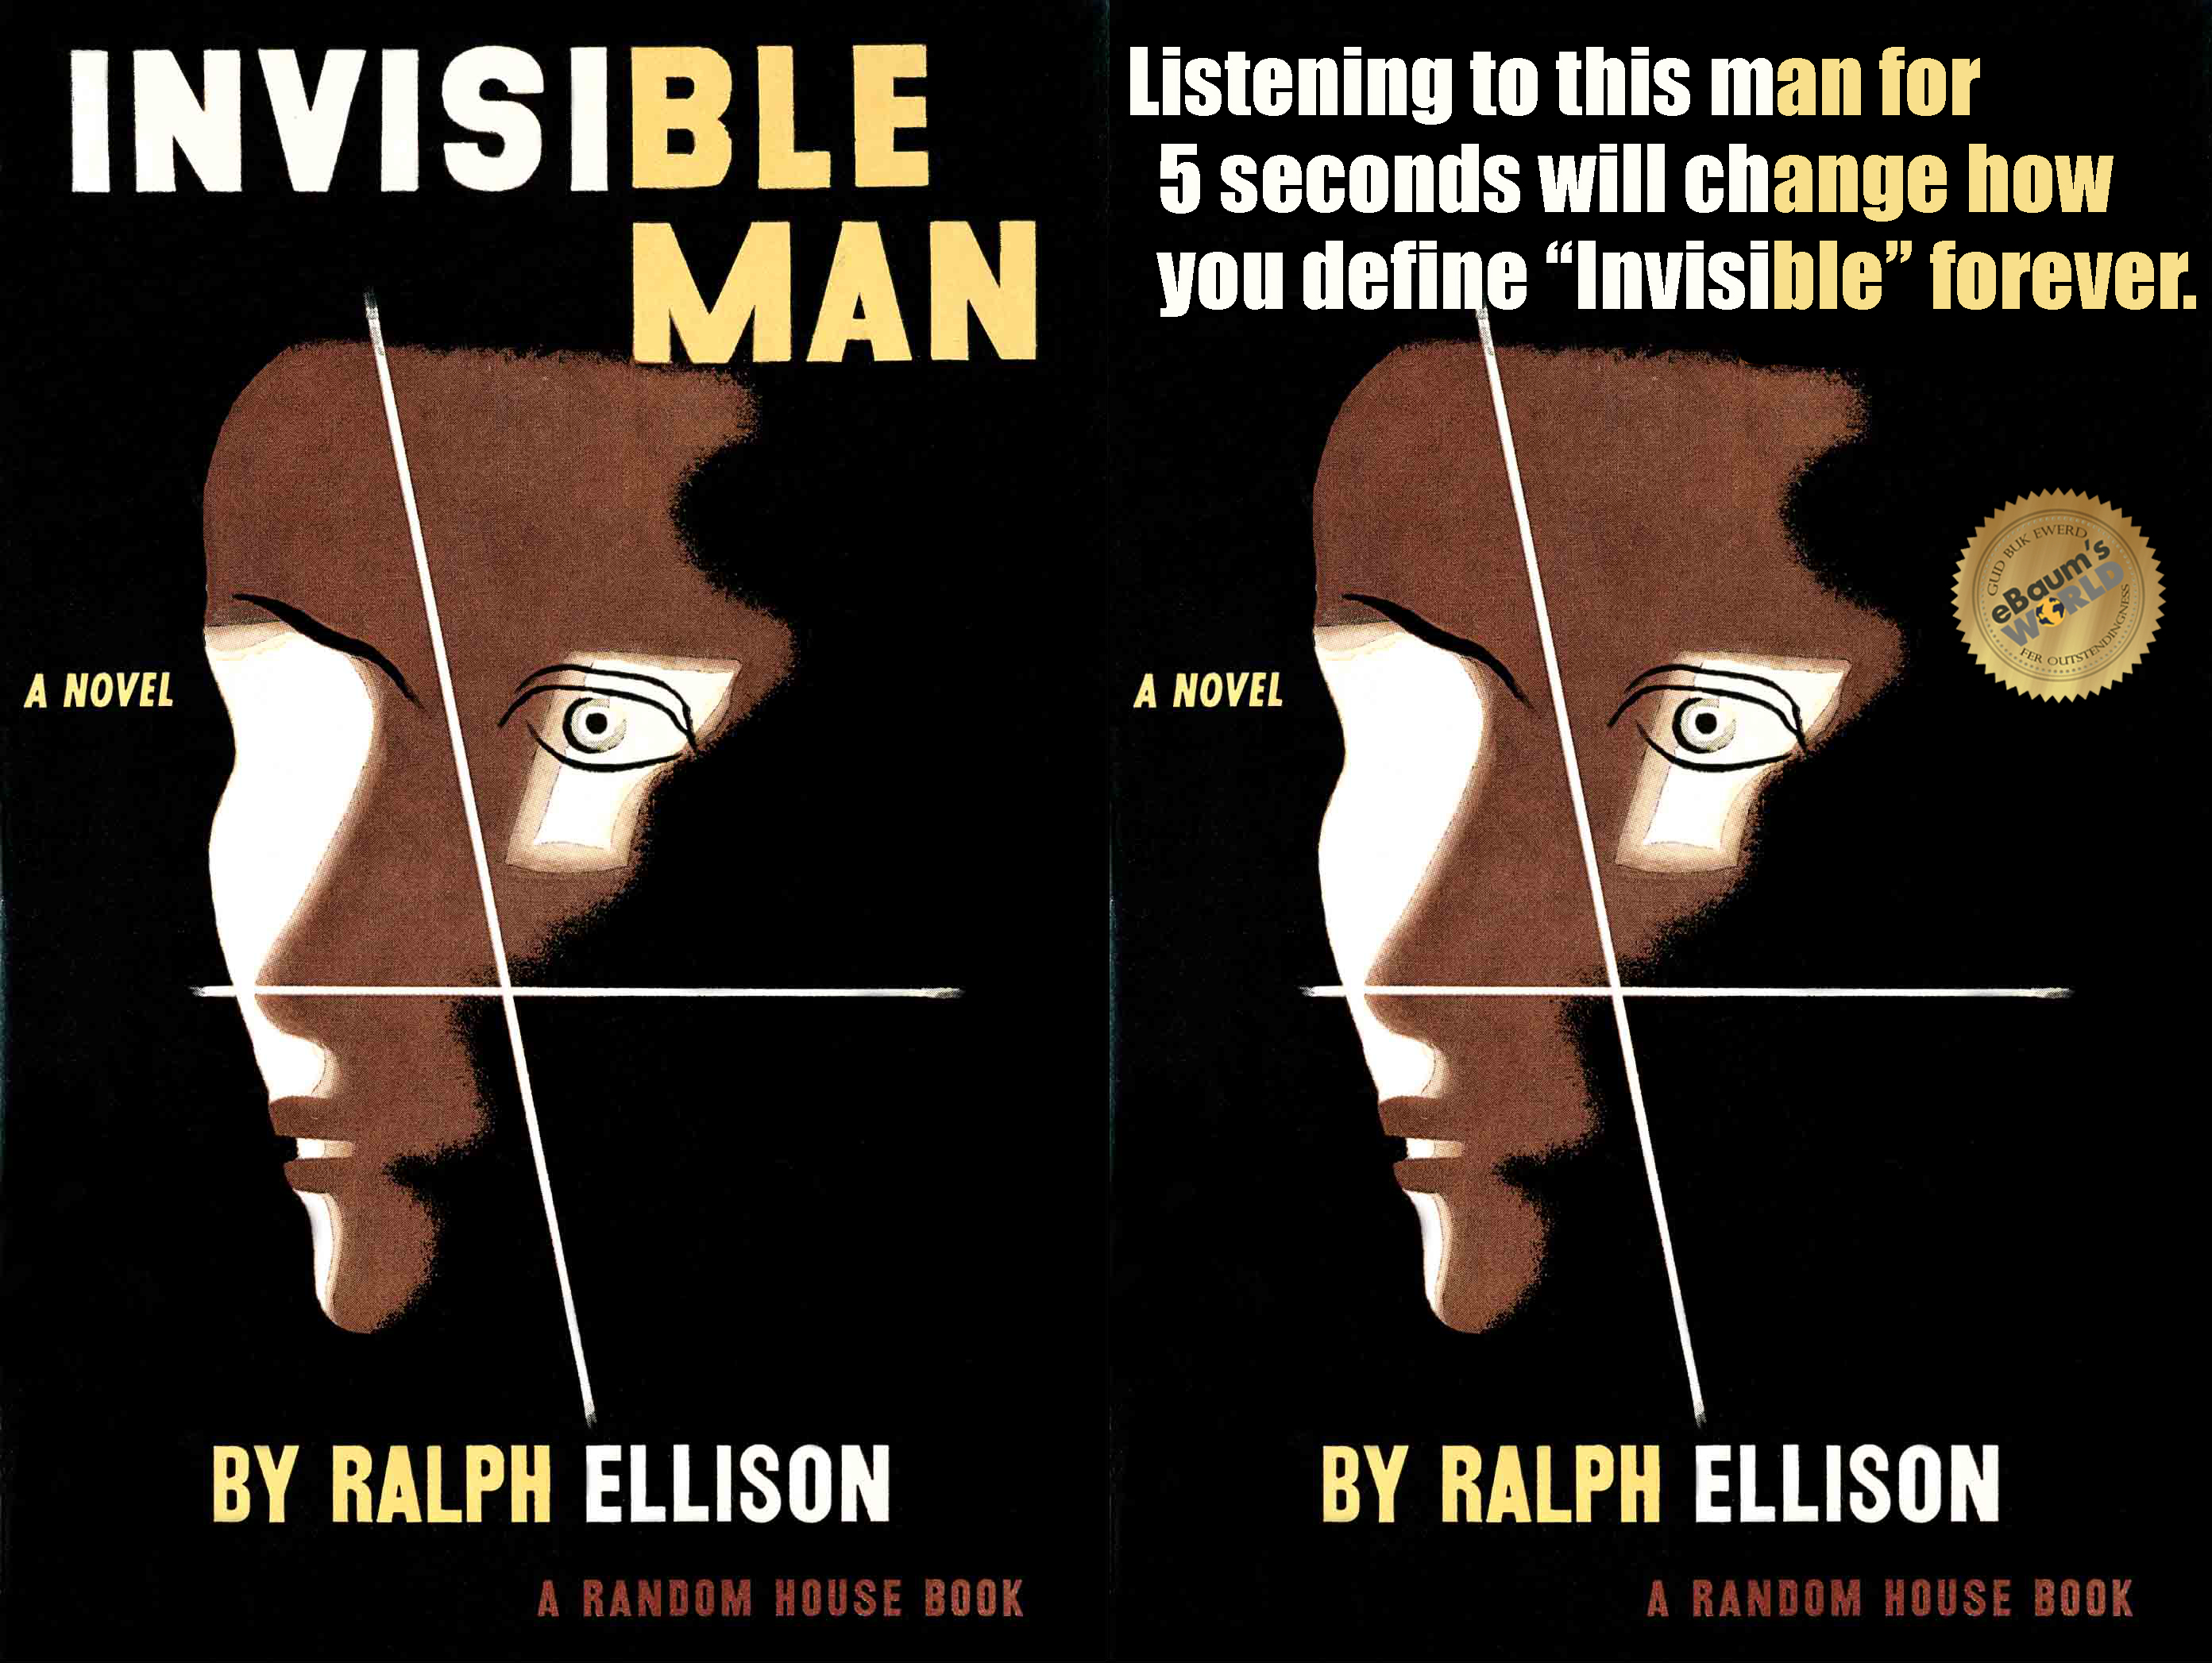 ralph ellison invisible man - Invisible Listening to this man for 5 seconds will change how you define Invisible" forever. A Novel A Novel By Ralph Ellison By Ralph Ellison A Random House Book A Random House Book